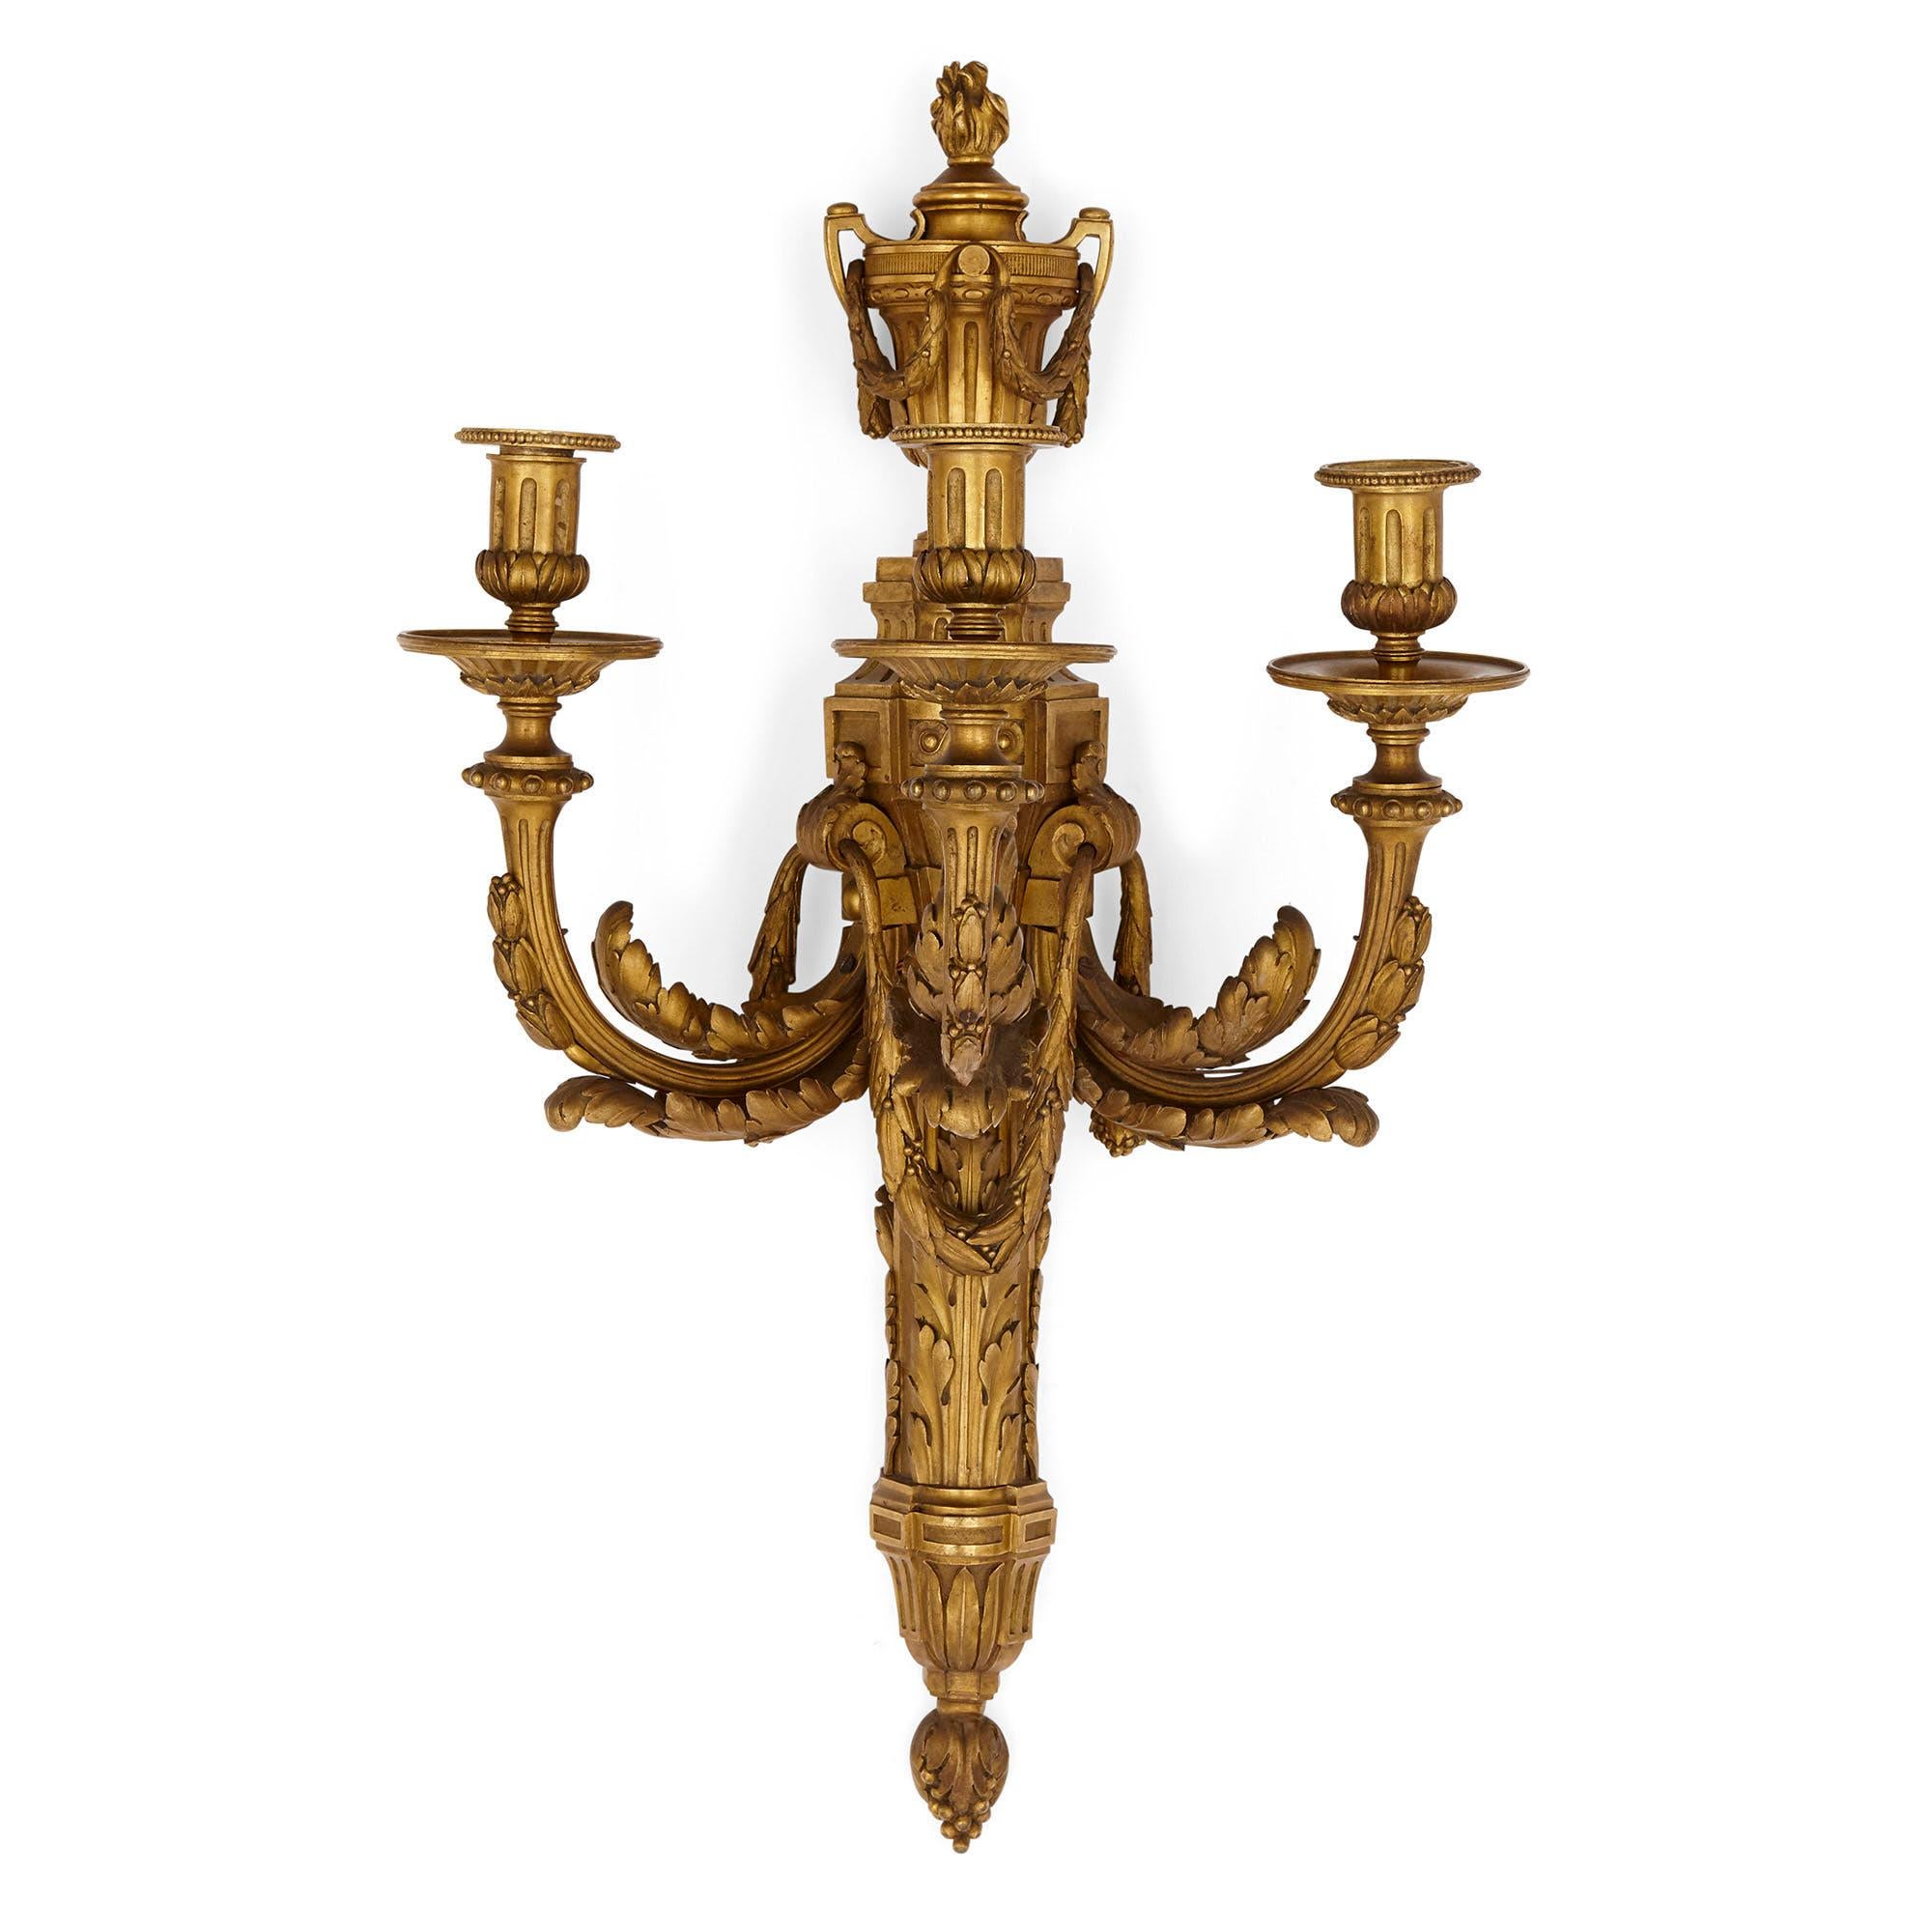 Pair of neoclassical style gilt bronze sconces
French, late 19th century
Measures: Height 74cm, width 43cm, depth 34cm

This fine pair of sconces is crafted from gilt bronze in the neoclassical style. Each sconce supports three light branches,